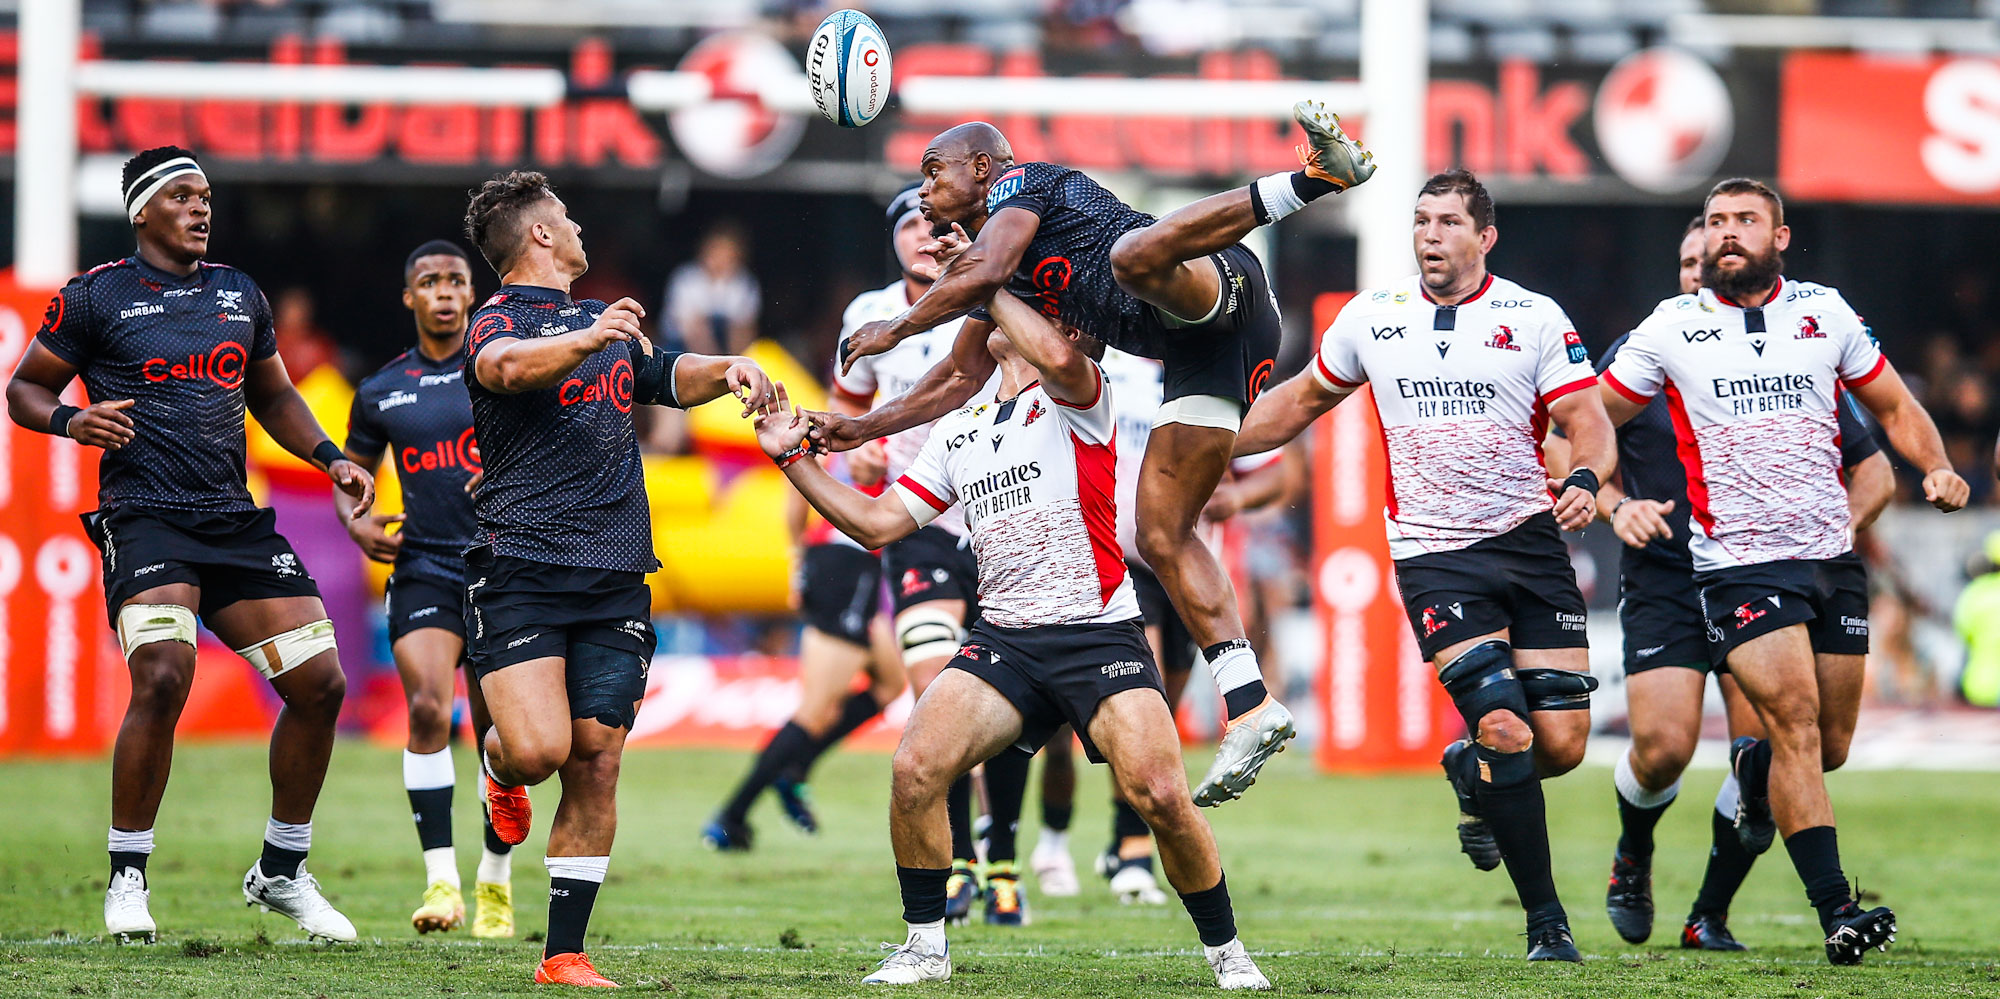 The Cell C Sharks start the season away to Munster while the Emirates Lions host the DHL Stormers in the opening round.